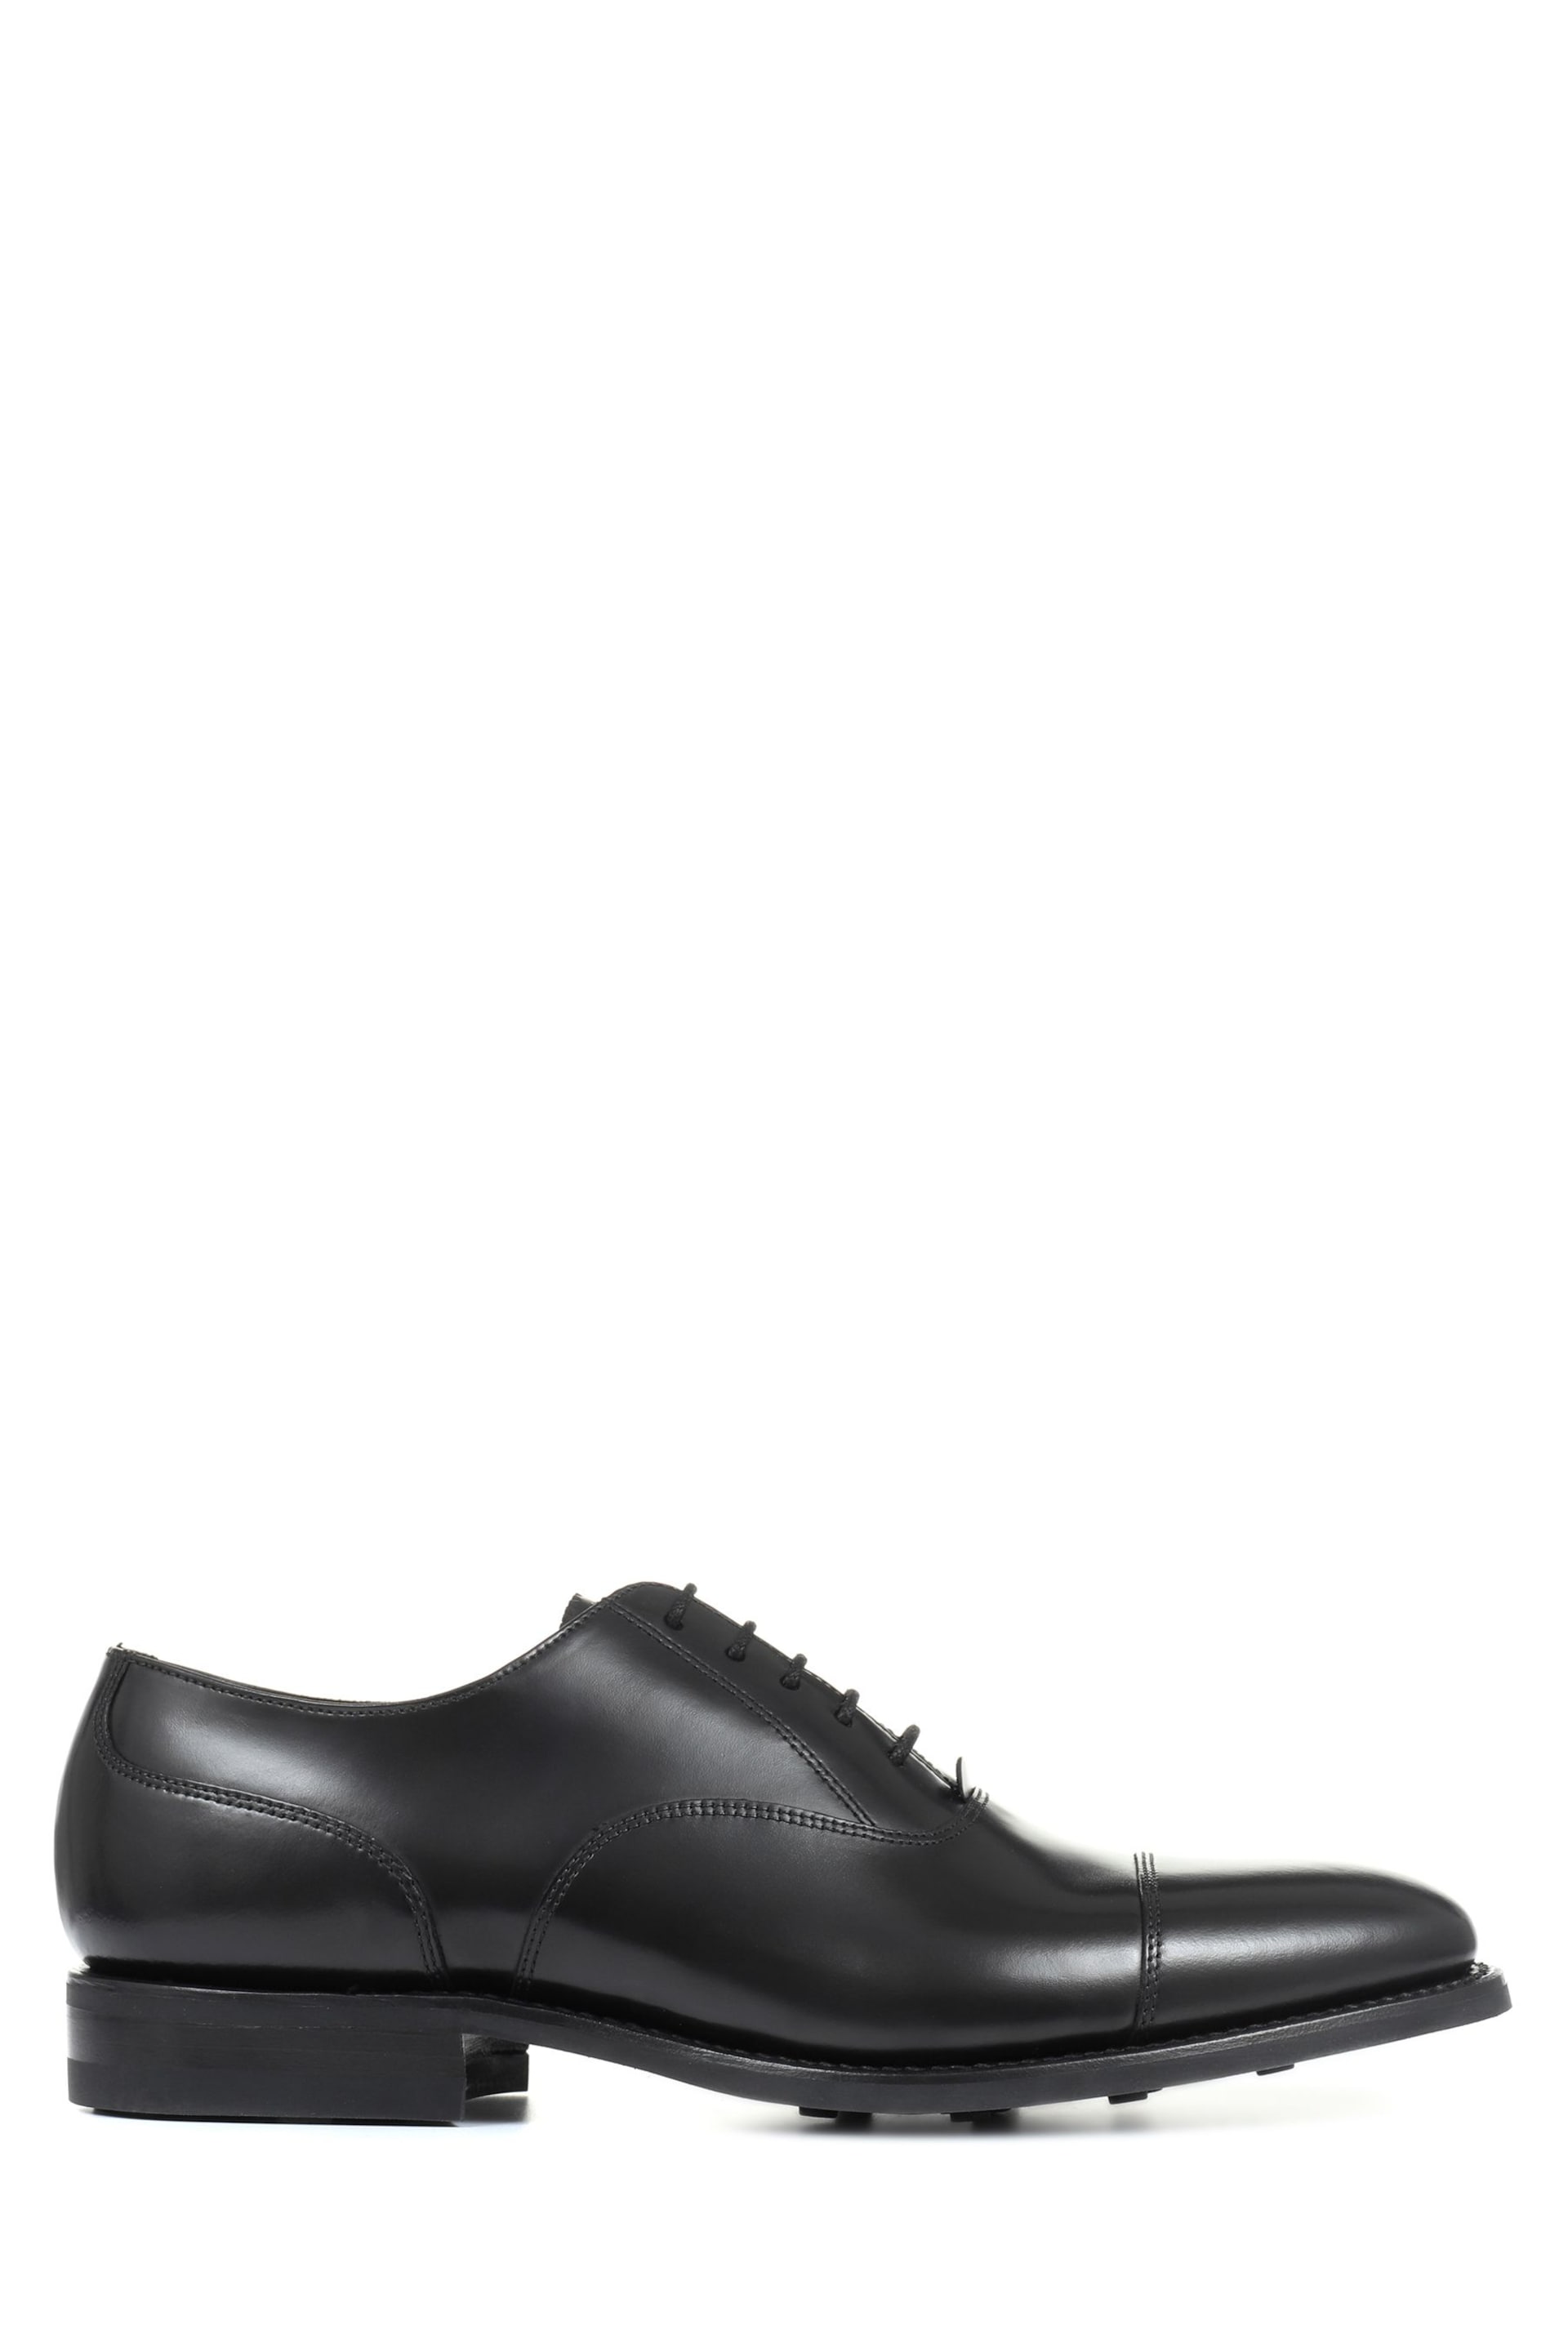 Design Loake by Jones Bootmaker Black Comanche Wide Fit Goodyear Welted Leather Oxford Shoes - Image 1 of 5